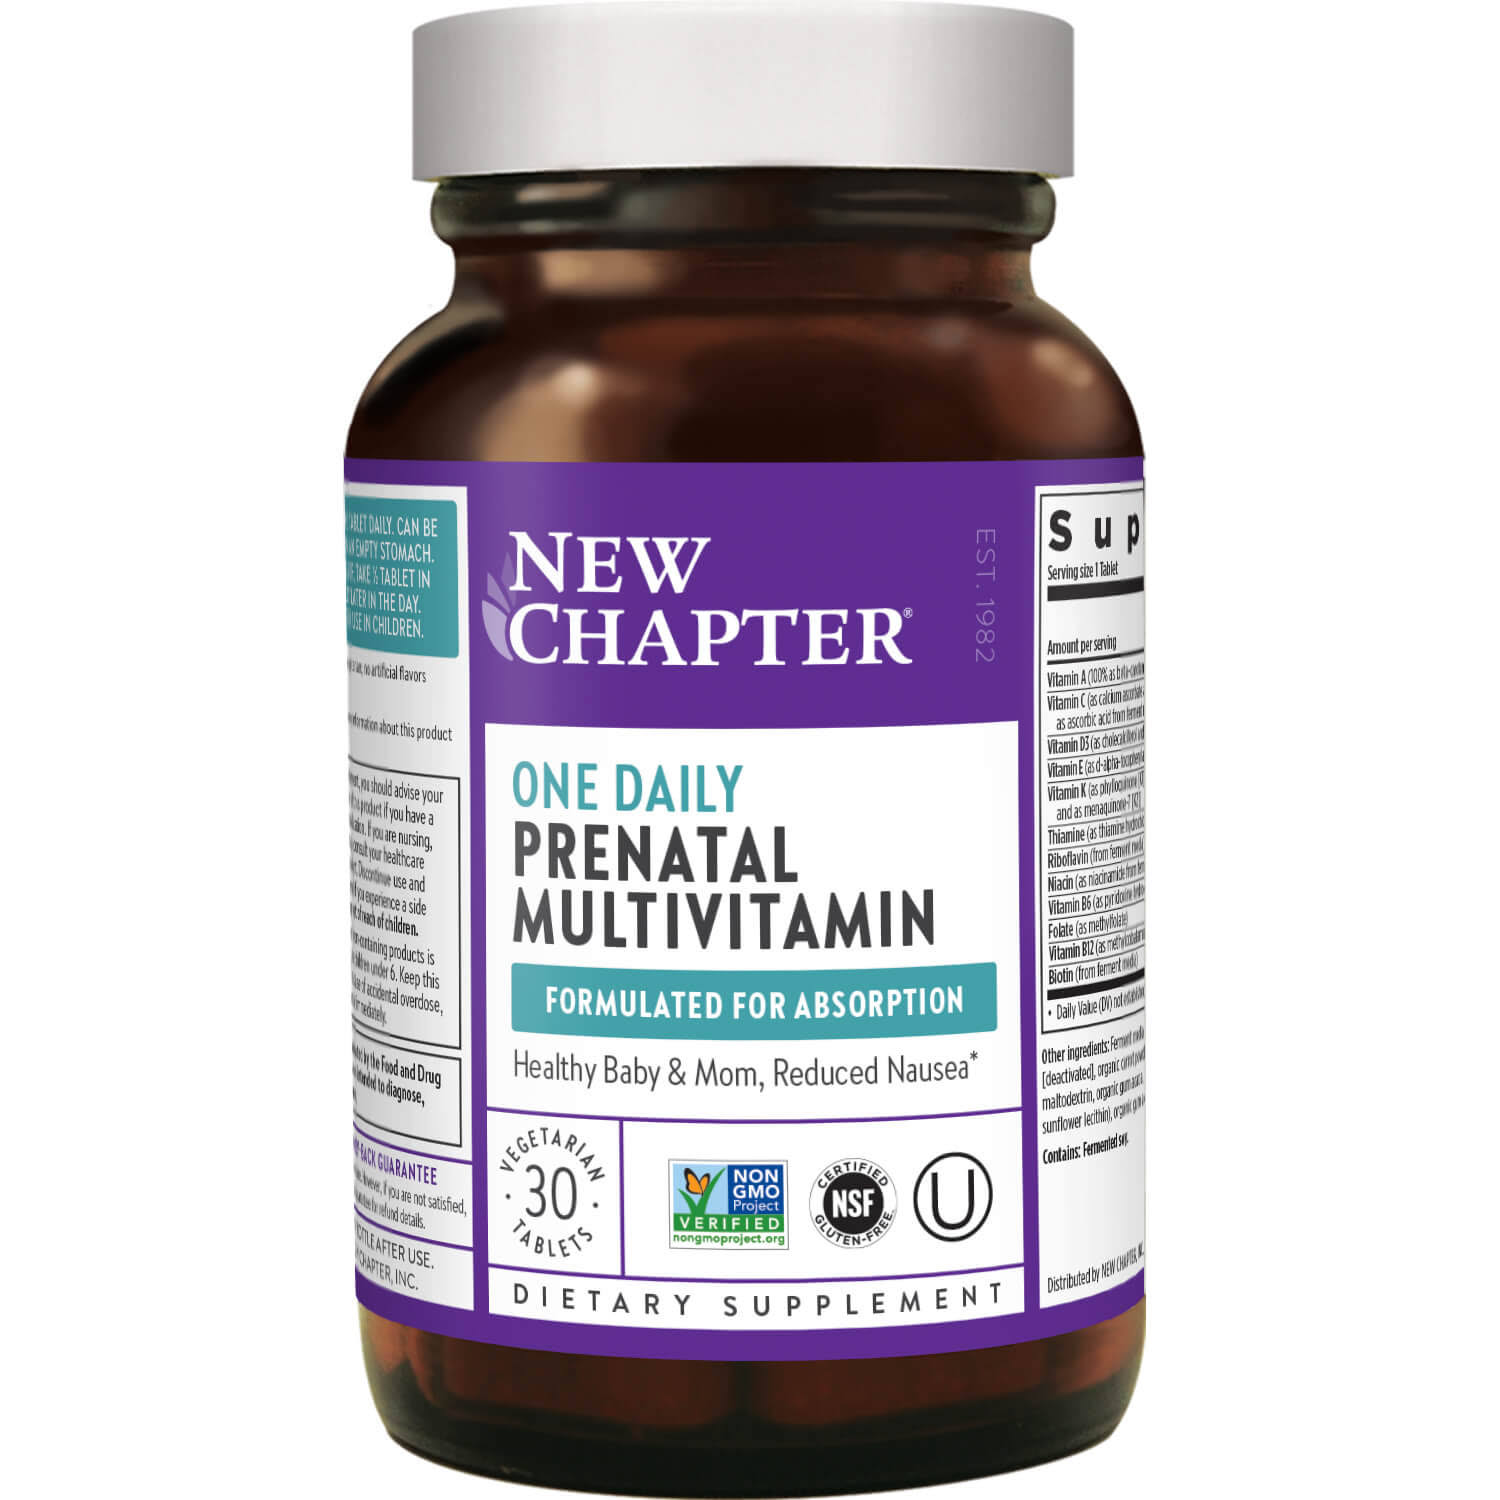 New Chapter One Daily Prenatal Multivitamin - 30 Tablets